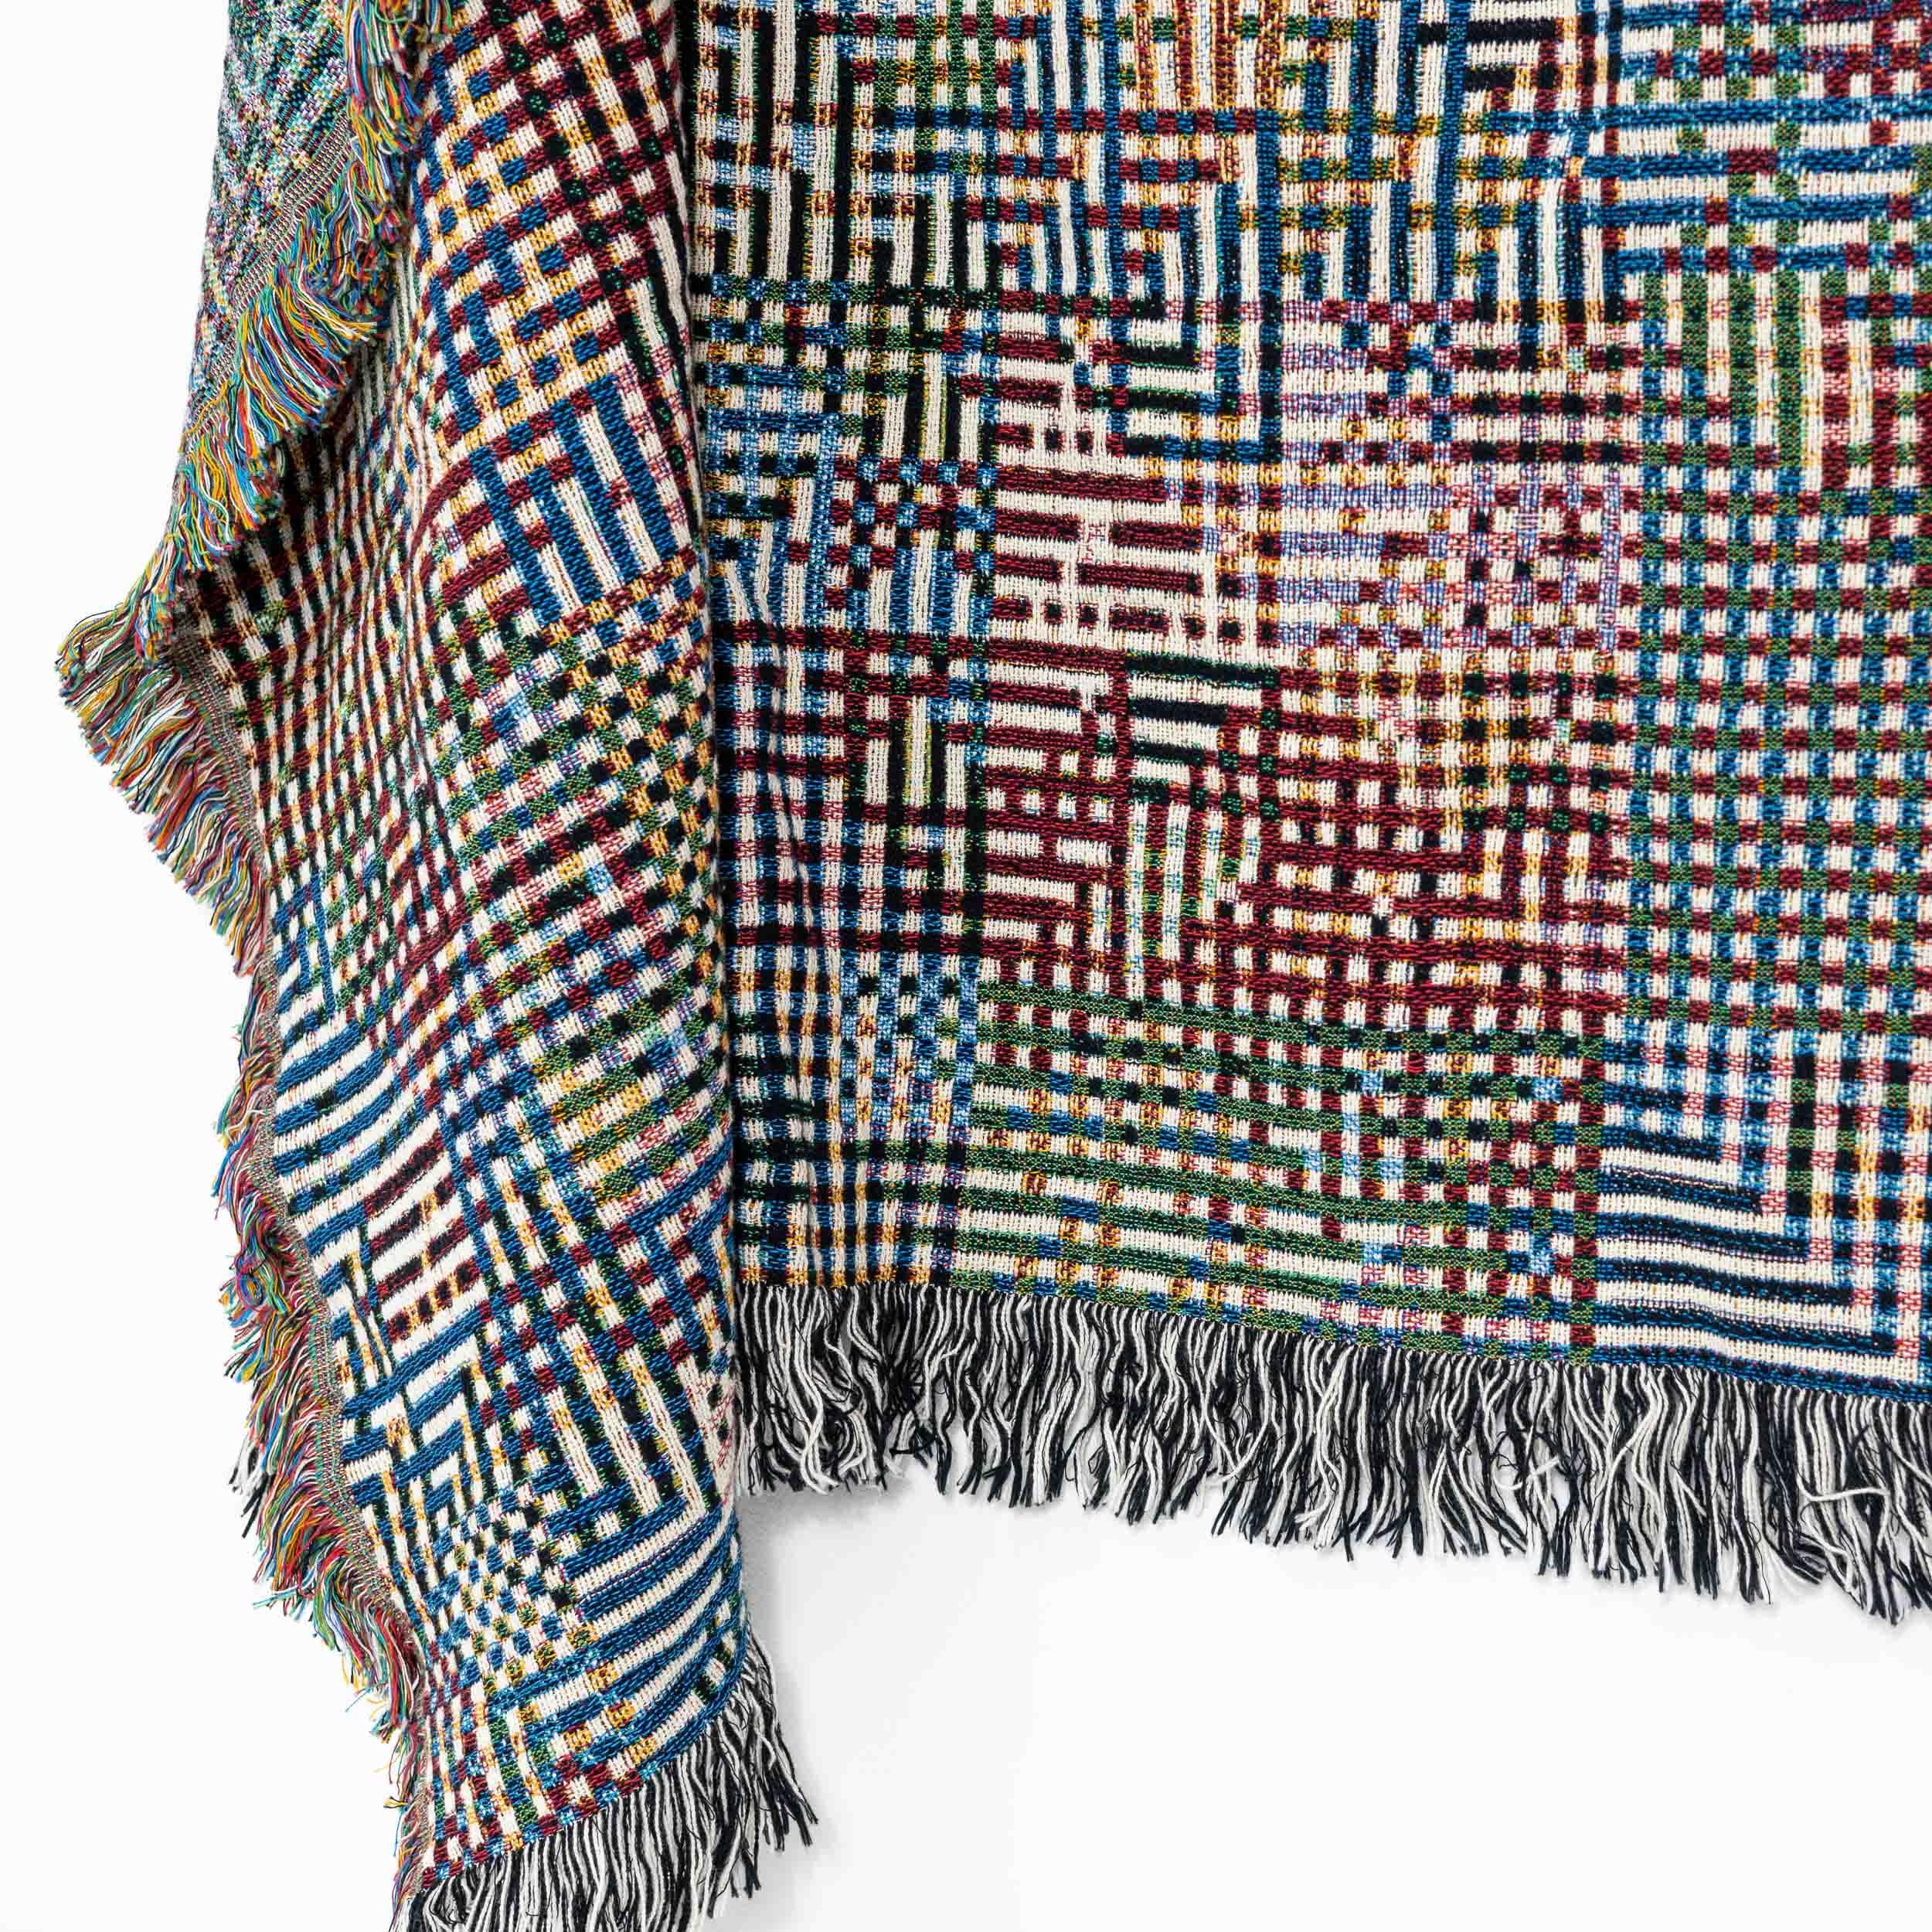 Bit map series 01 by Luft Tanaka Studio 

A multicolored and visually striking throw blanket / wall tapestry woven out of 100 % cotton yarn.

Measures: 60